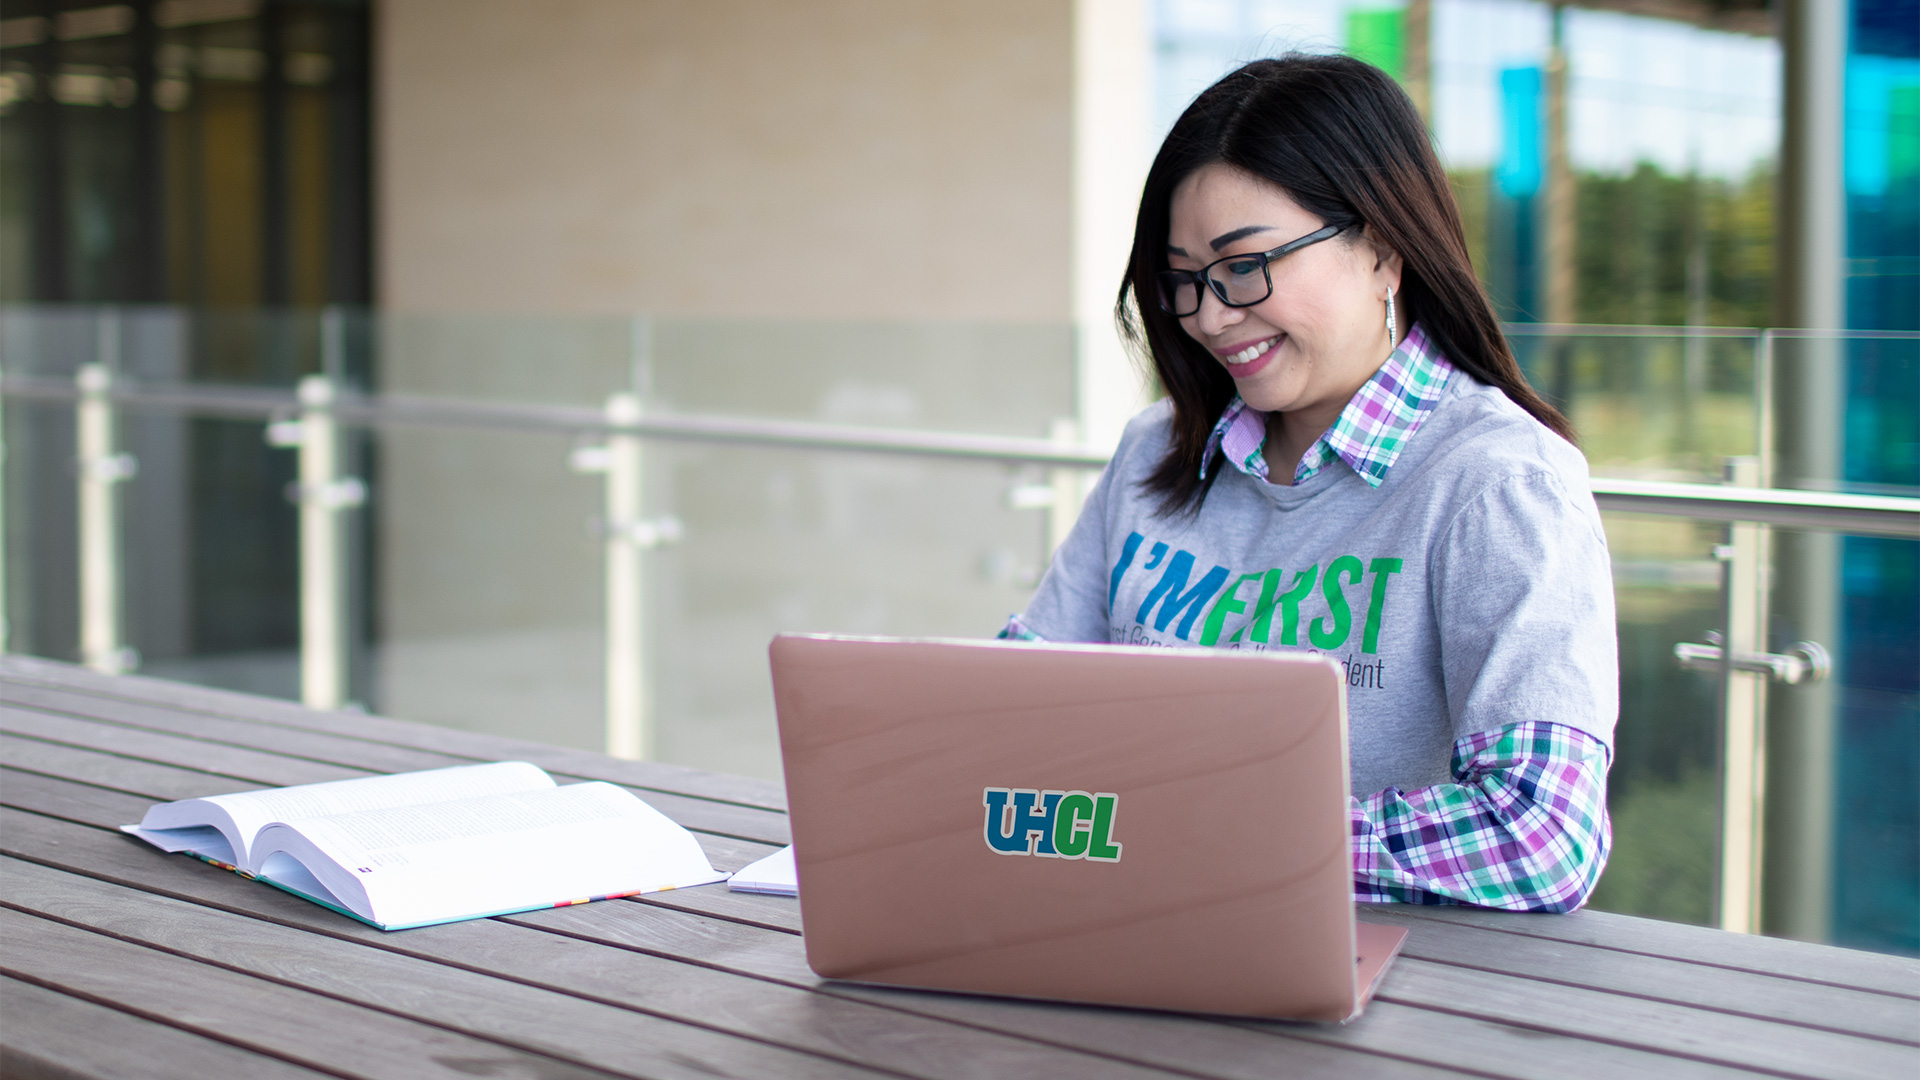 Discover UHCL Visitors